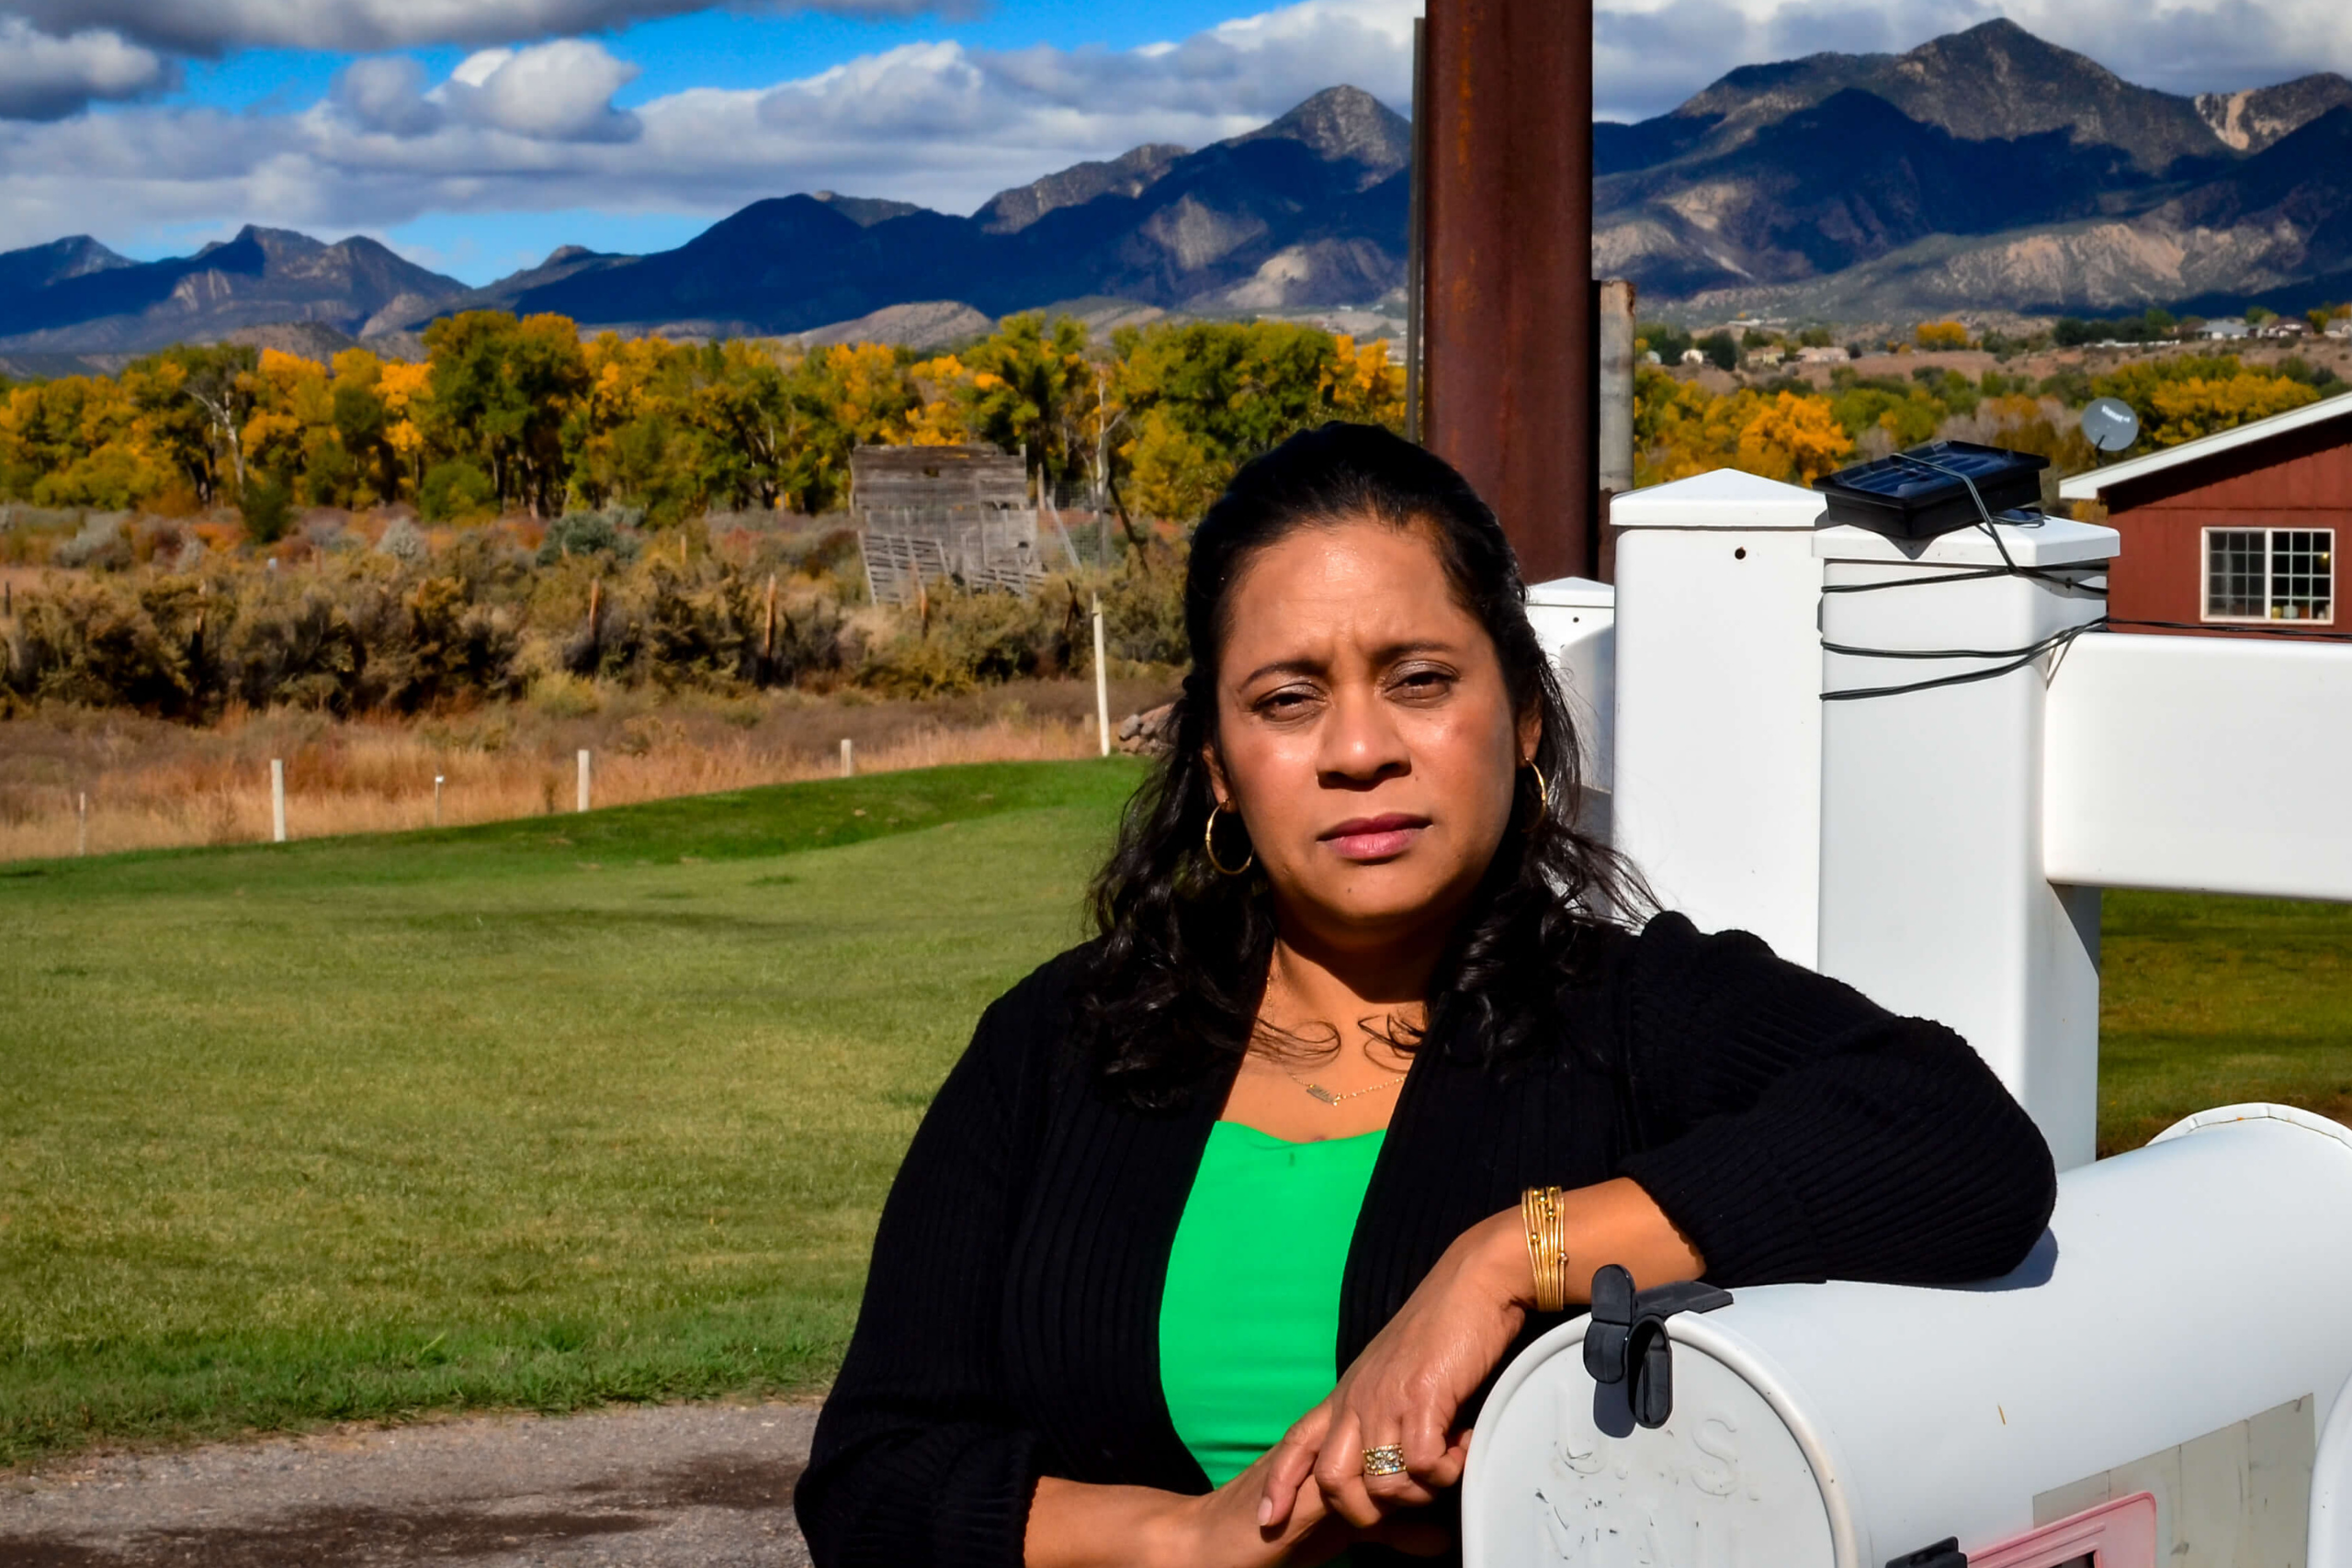 The Savings Collaborative's Alma Guzman stands in front of her home in rural Colorado